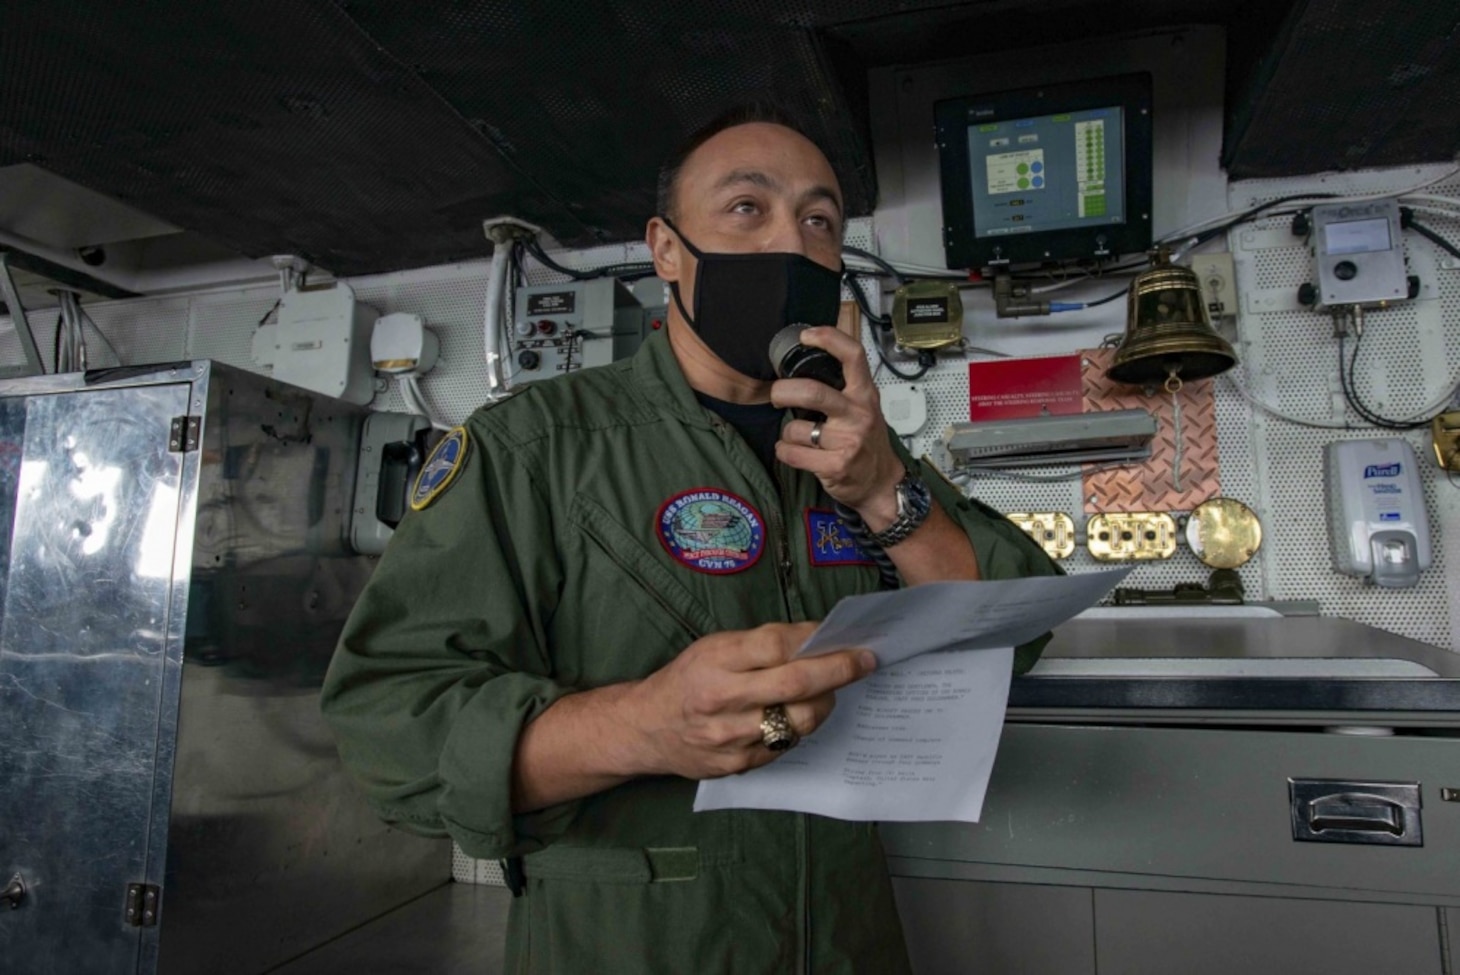 PHILIPPINE SEA (Oct. 1, 2020) Capt. Fred Goldhammer, commanding officer of the Navy’s only forward-deployed aircraft carrier USS Ronald Reagan (CVN 76), addresses his crew during a change-of-command ceremony in the pilot house. Ronald Reagan, the flagship of Carrier Strike Group 5, provides a combat-ready force that protects and defends the United States, as well as the collective maritime interests of its allies and partners in the Indo-Pacific region.